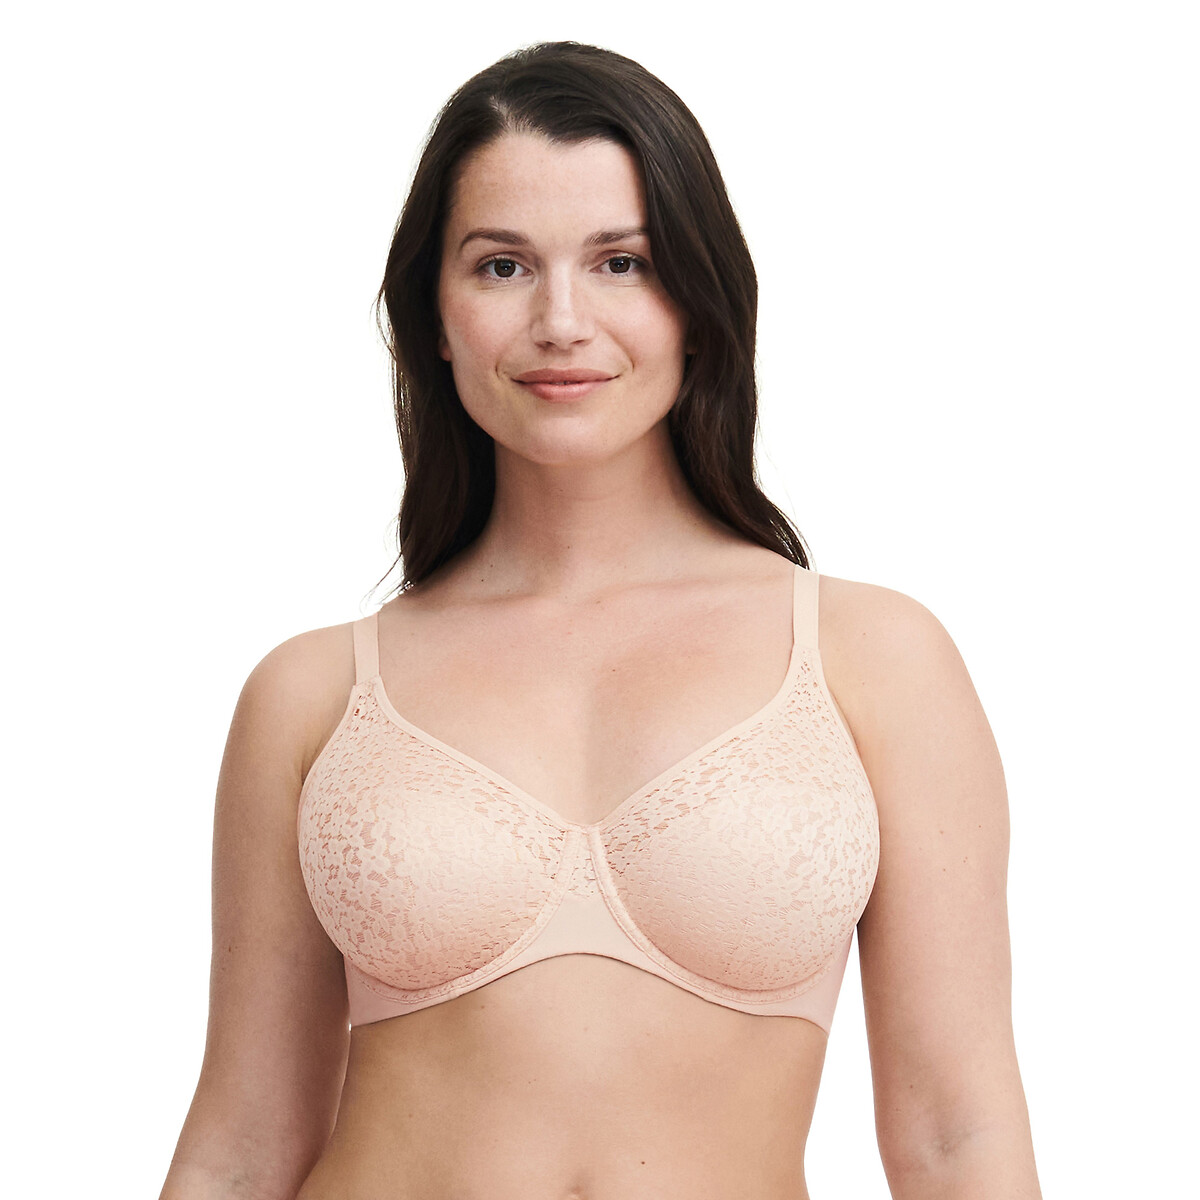 T-Shirt Bras Large & Small Cup Sizes Online – Tagged size-34ff–